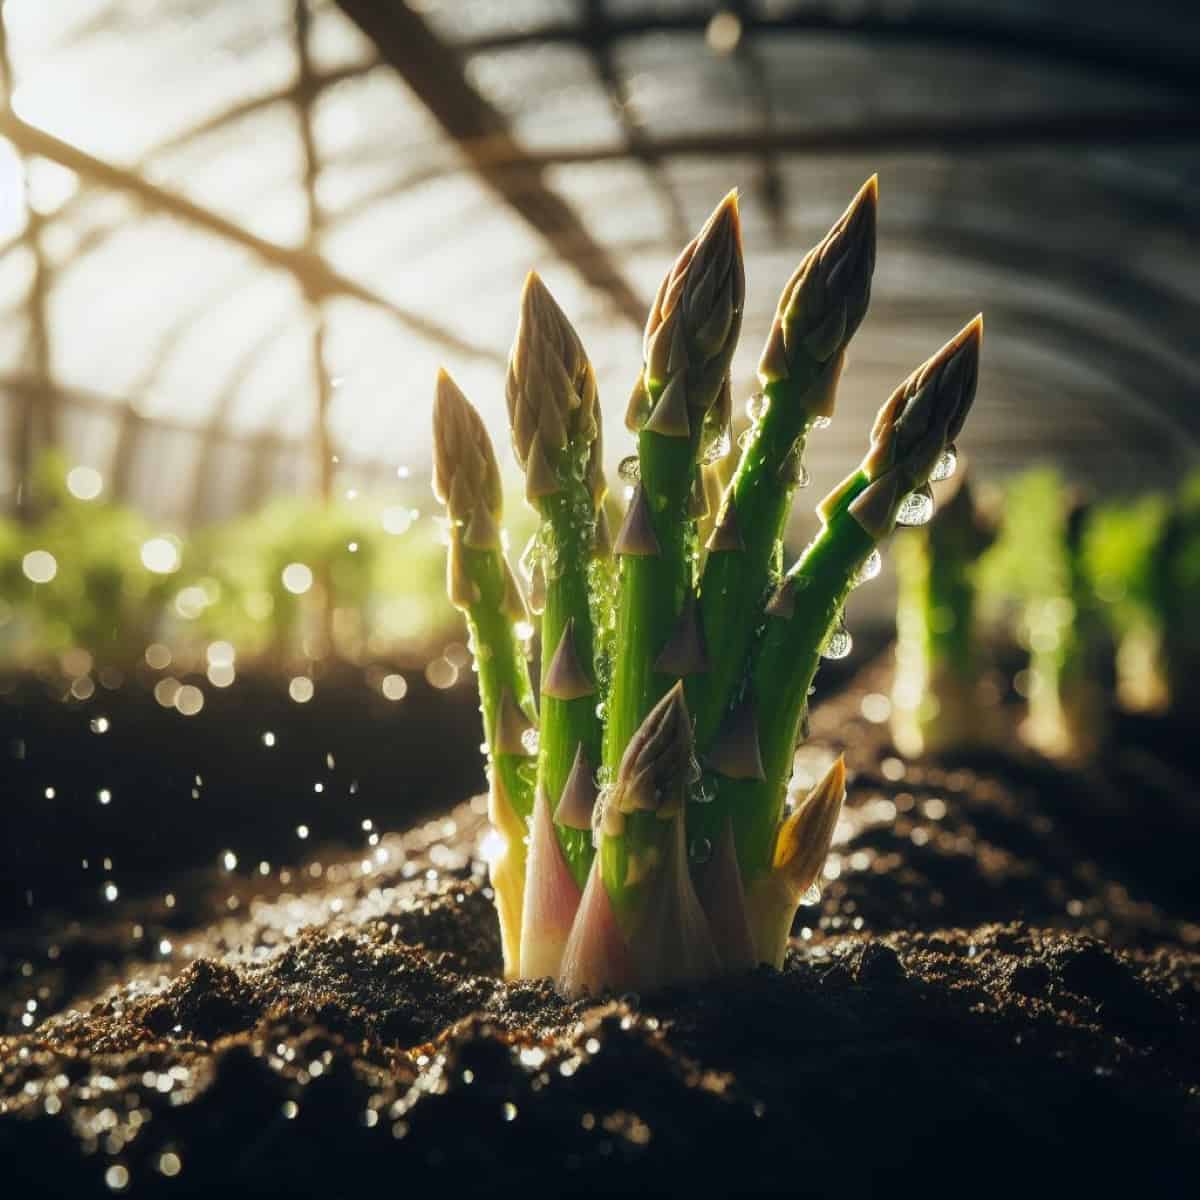 How to Grow Asparagus in Greenhouses
